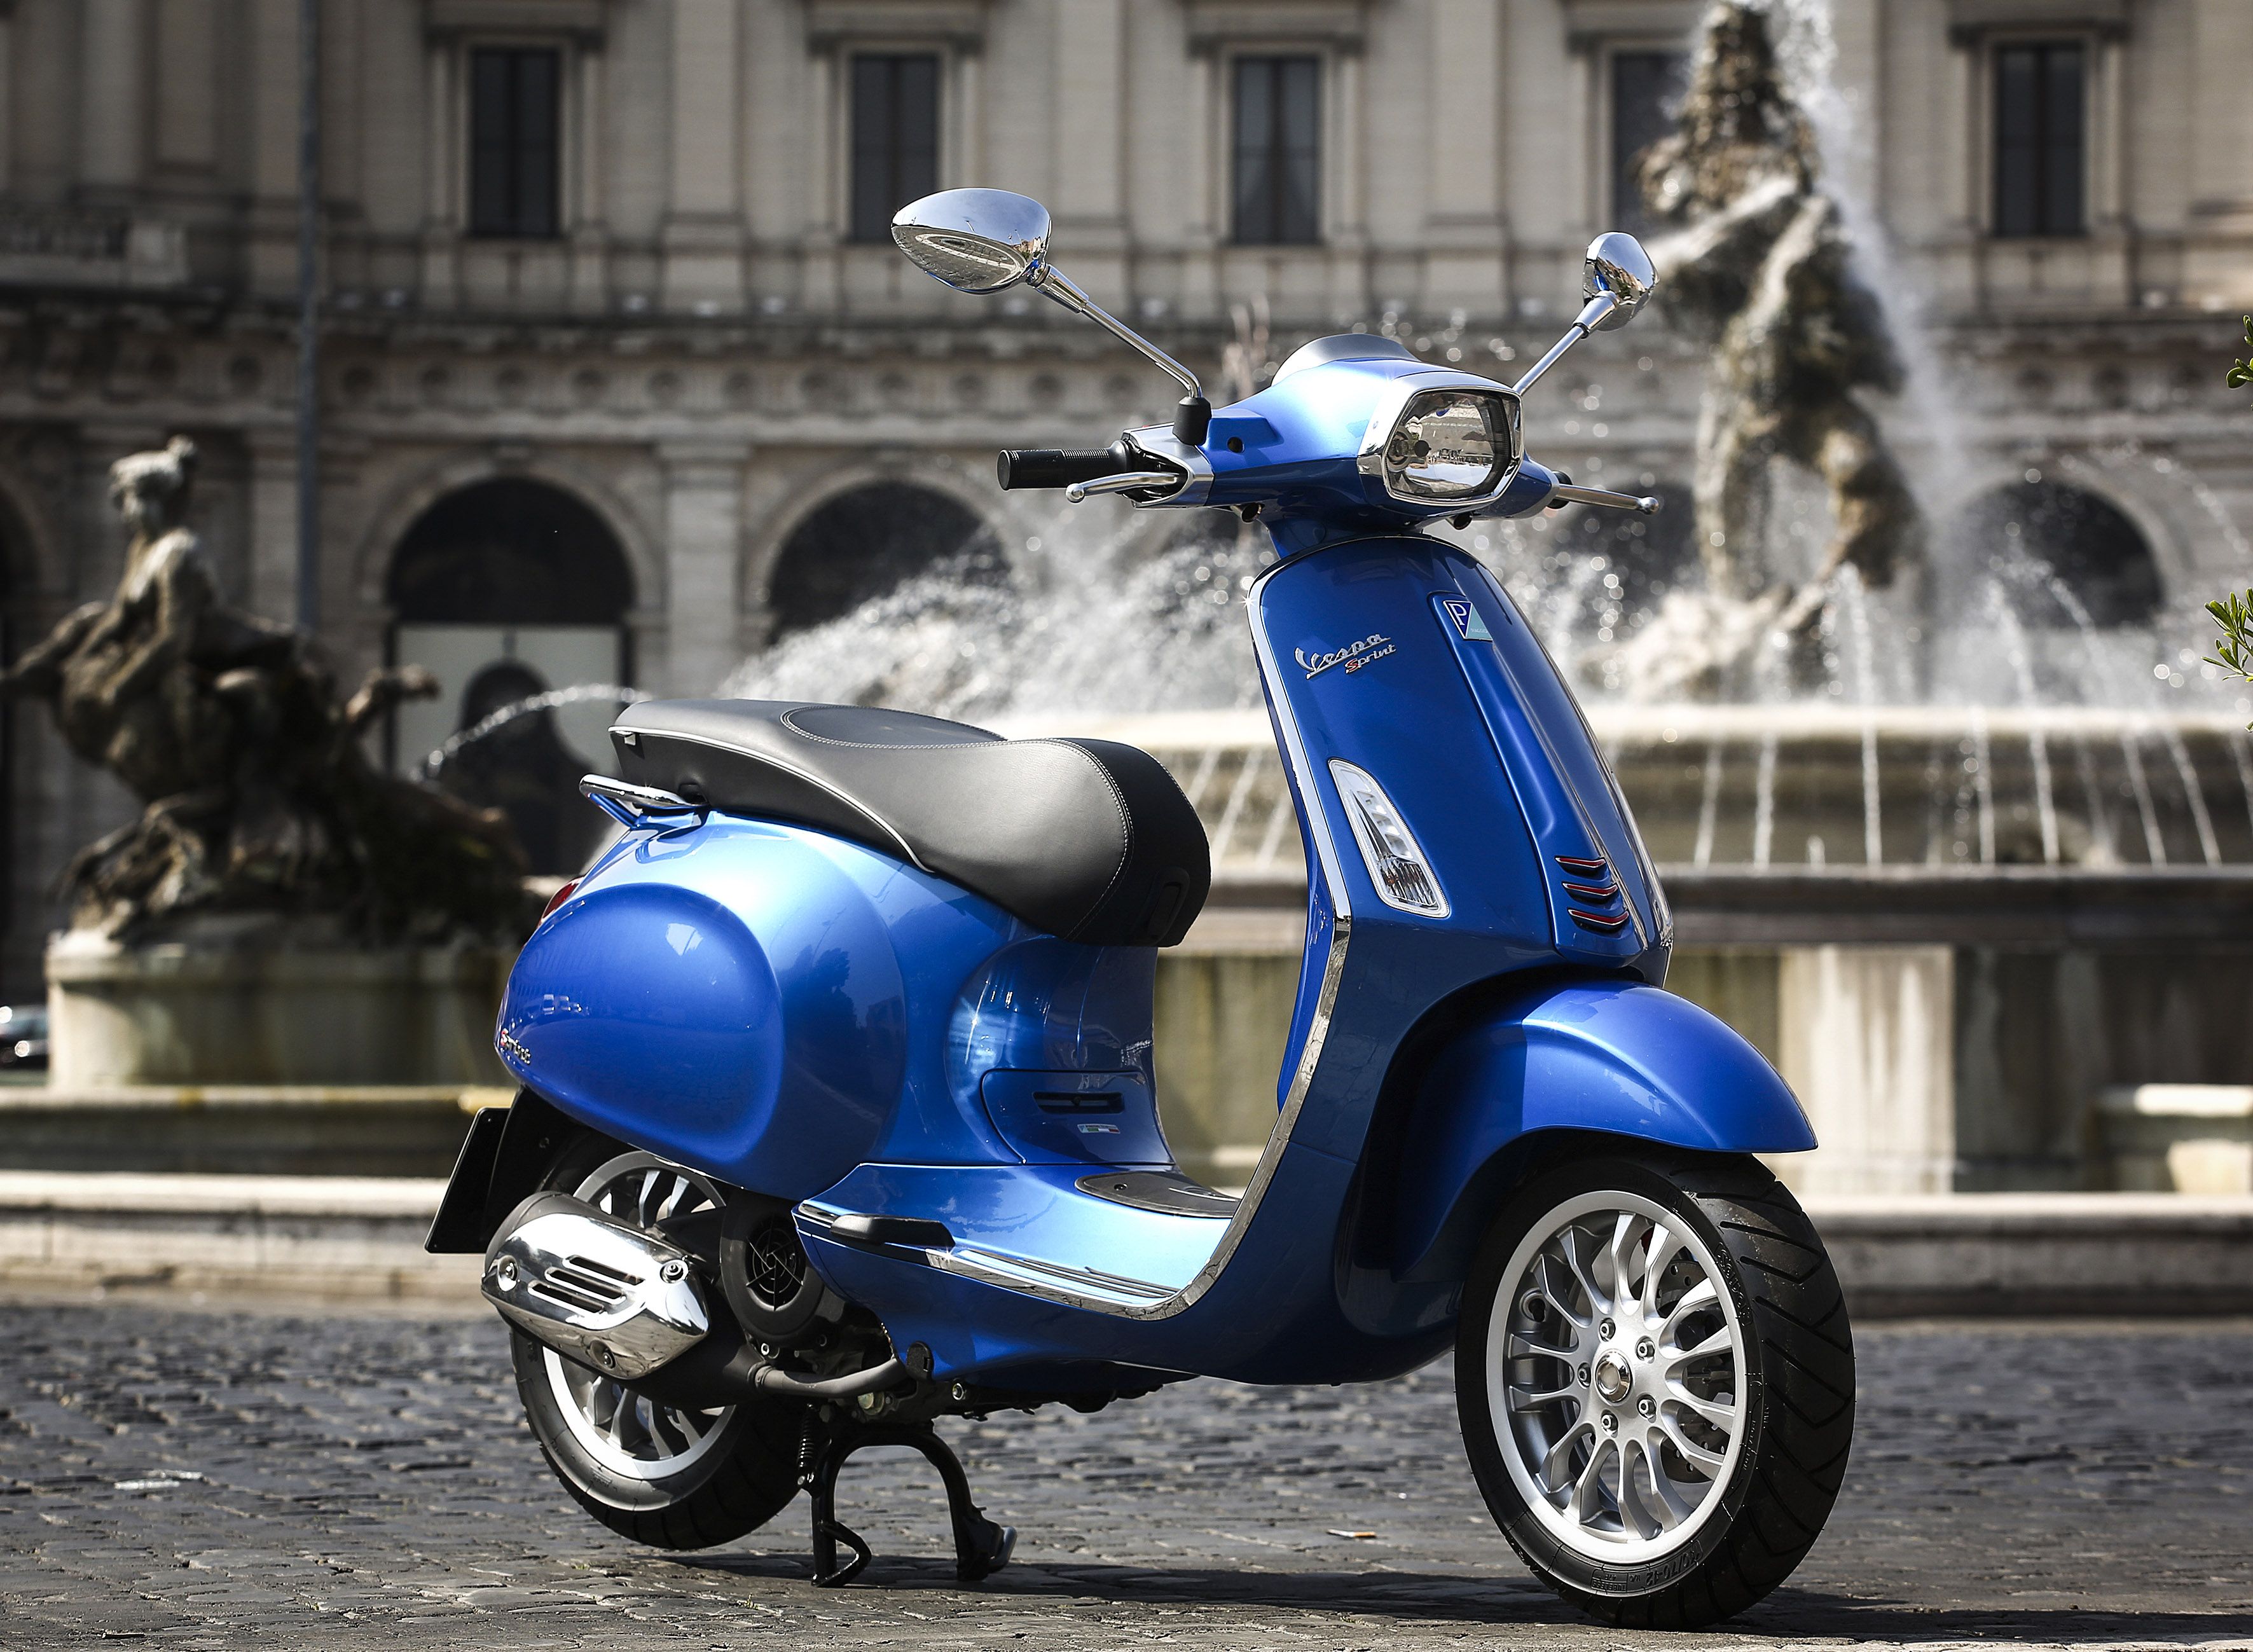 Vespa and Mini bring updated versions of classic models to